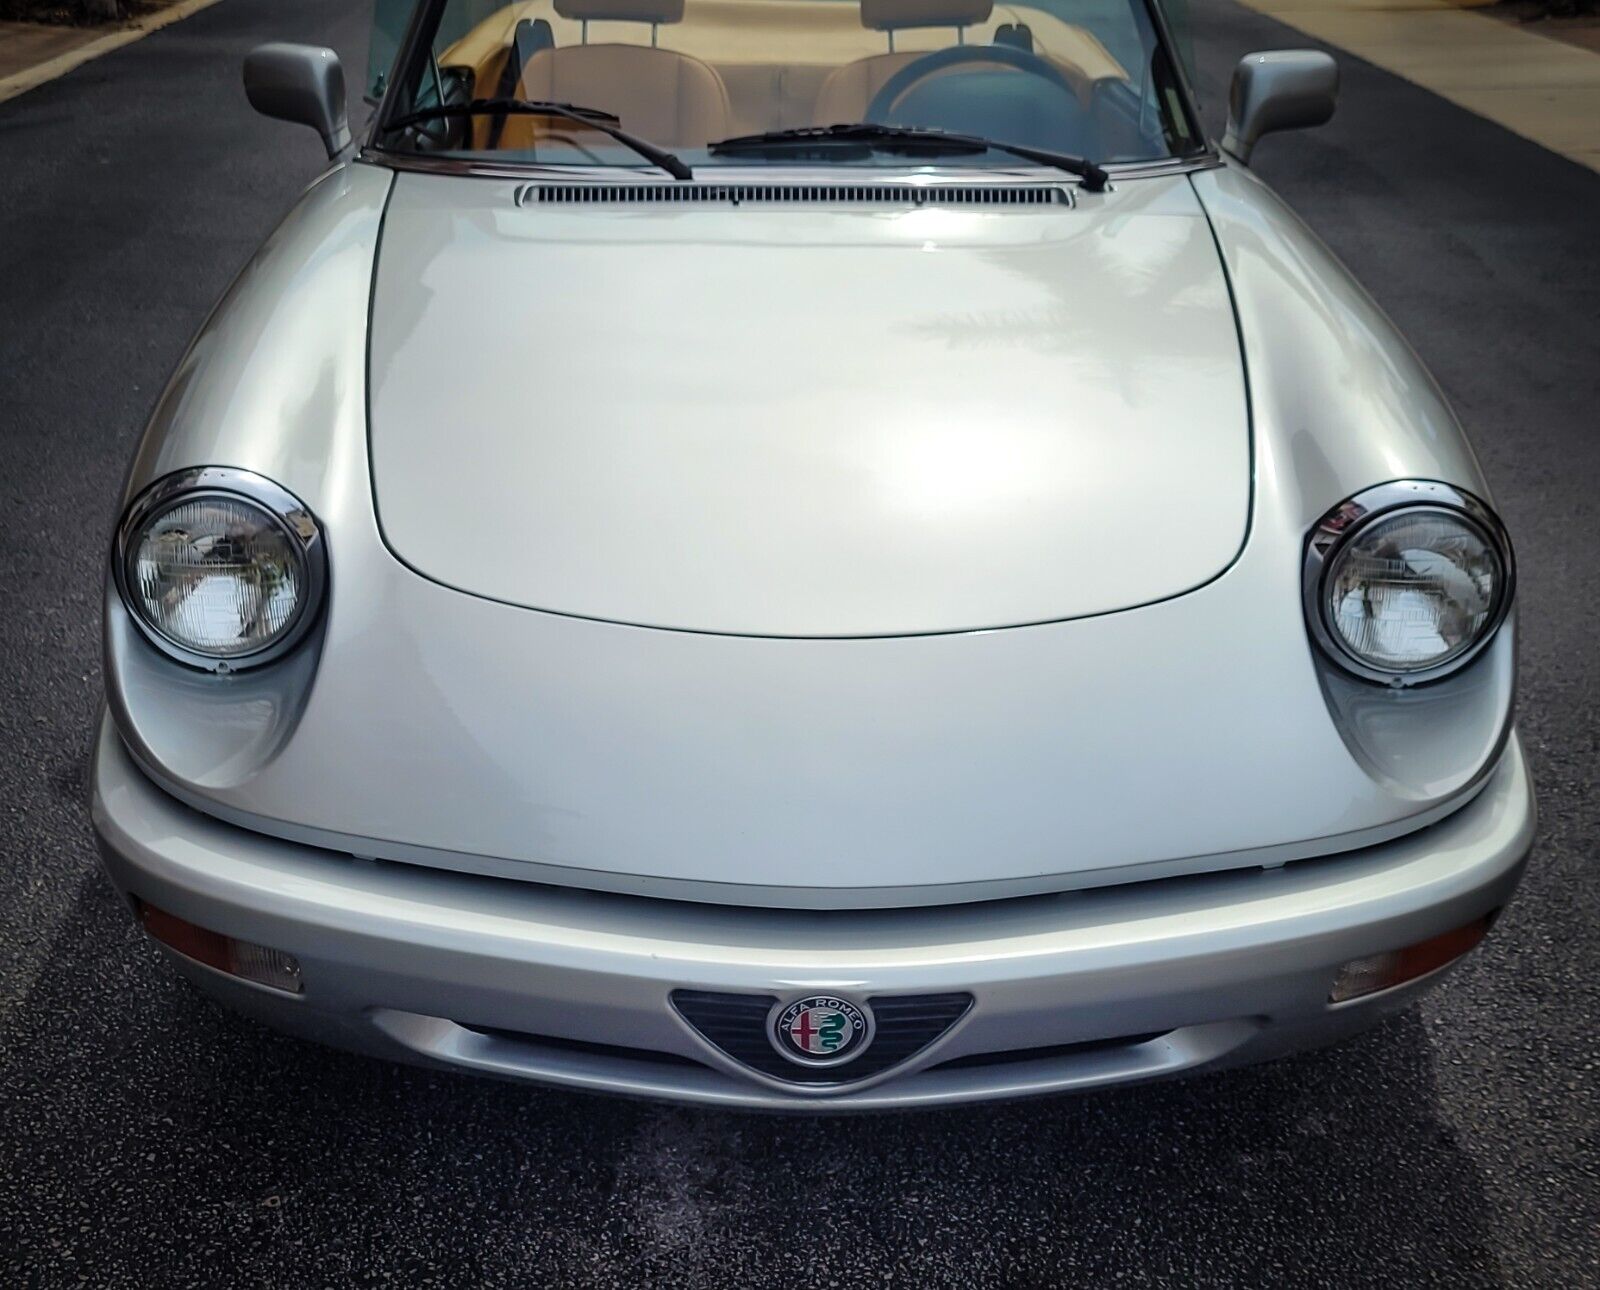 The Modern Classic Series 3 Alfa Romeo Spider Is on the Rise